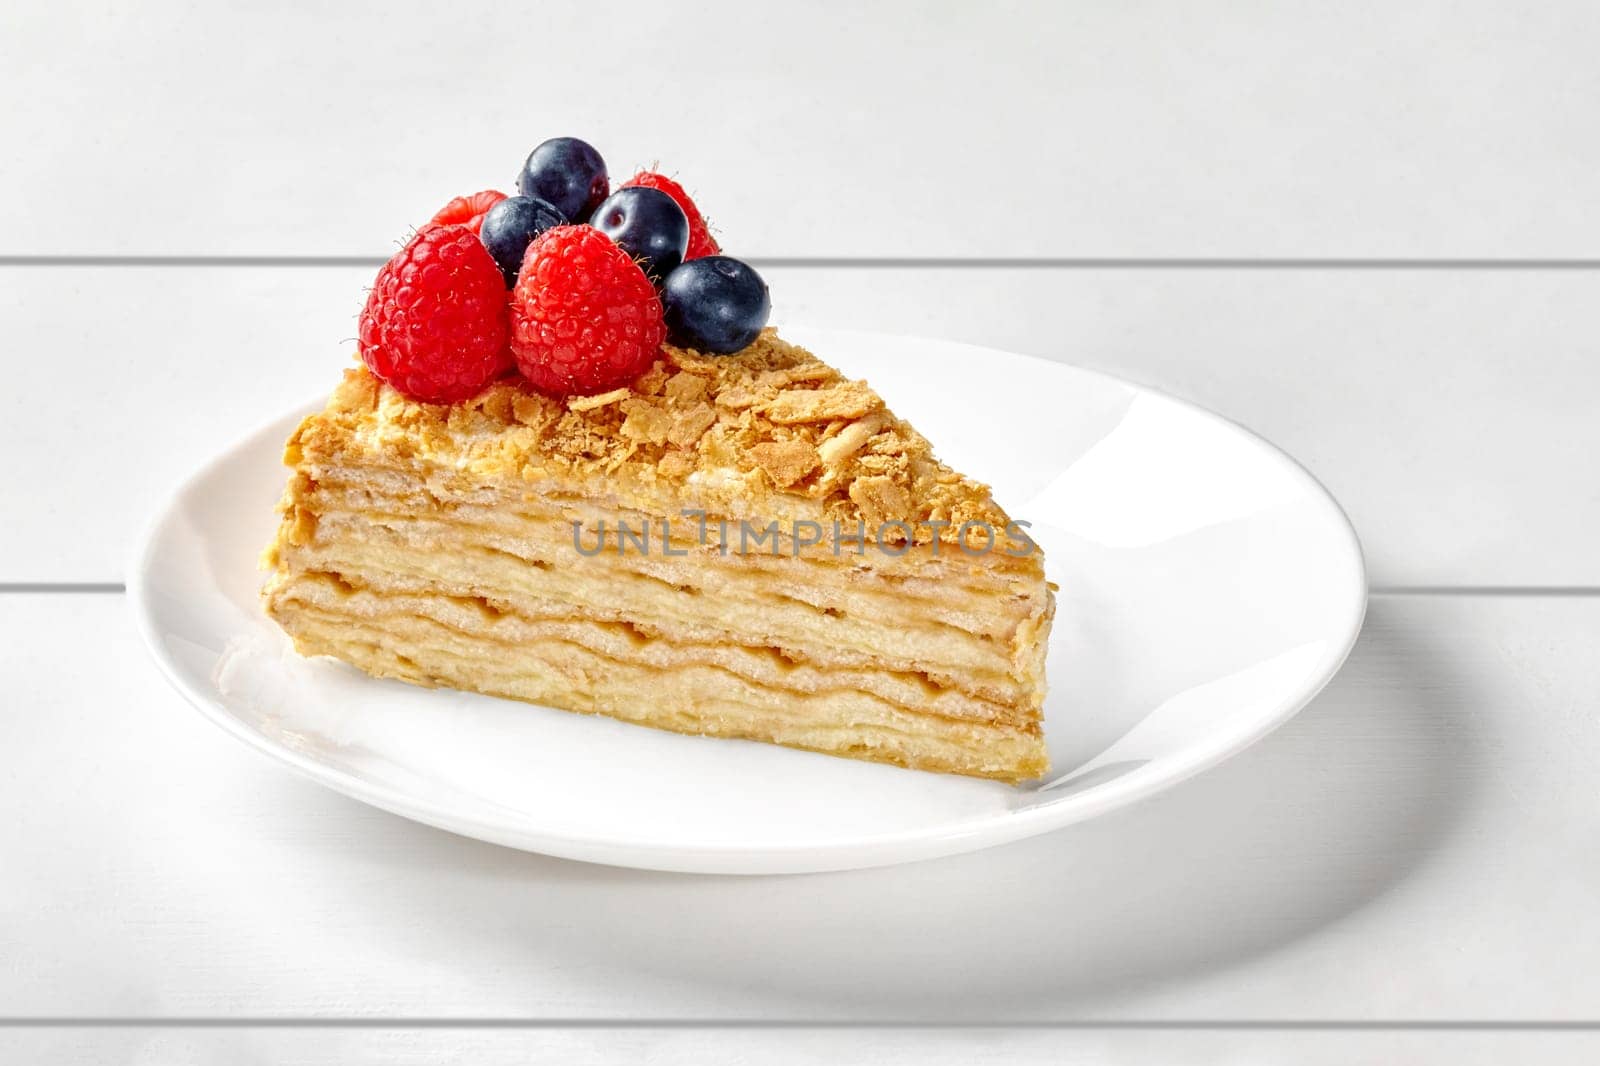 Mille feuille cake with butter pastry cream and fresh berries by nazarovsergey